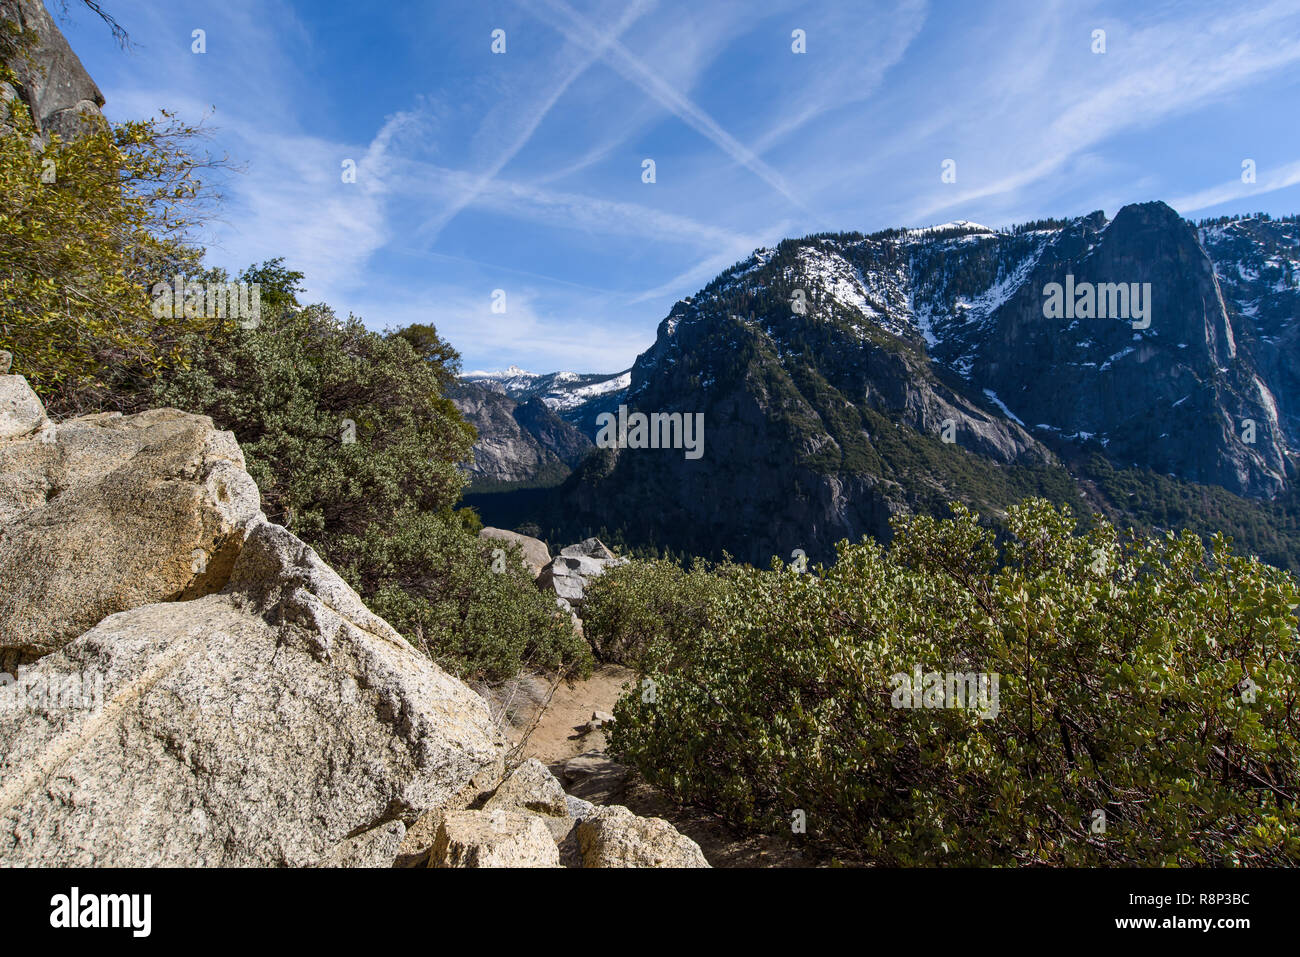 View of Half Dome, Yosemite National Park, set against blue sky streaked with vapour trails. Stock Photo